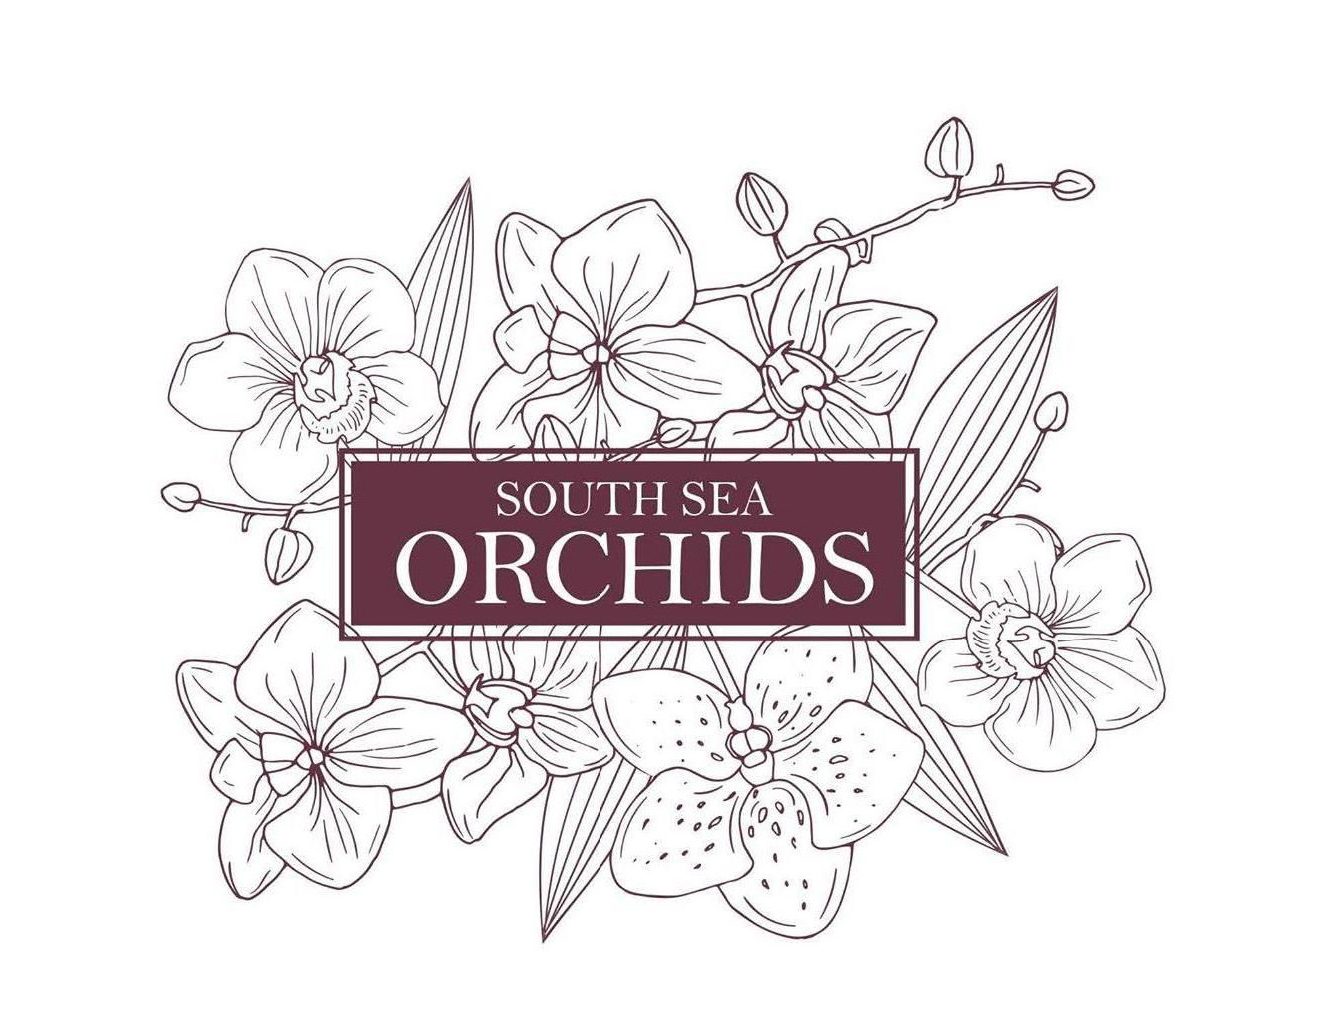 Drawing of Australian orchids with "South Sea Orchids" text in burgundy box.